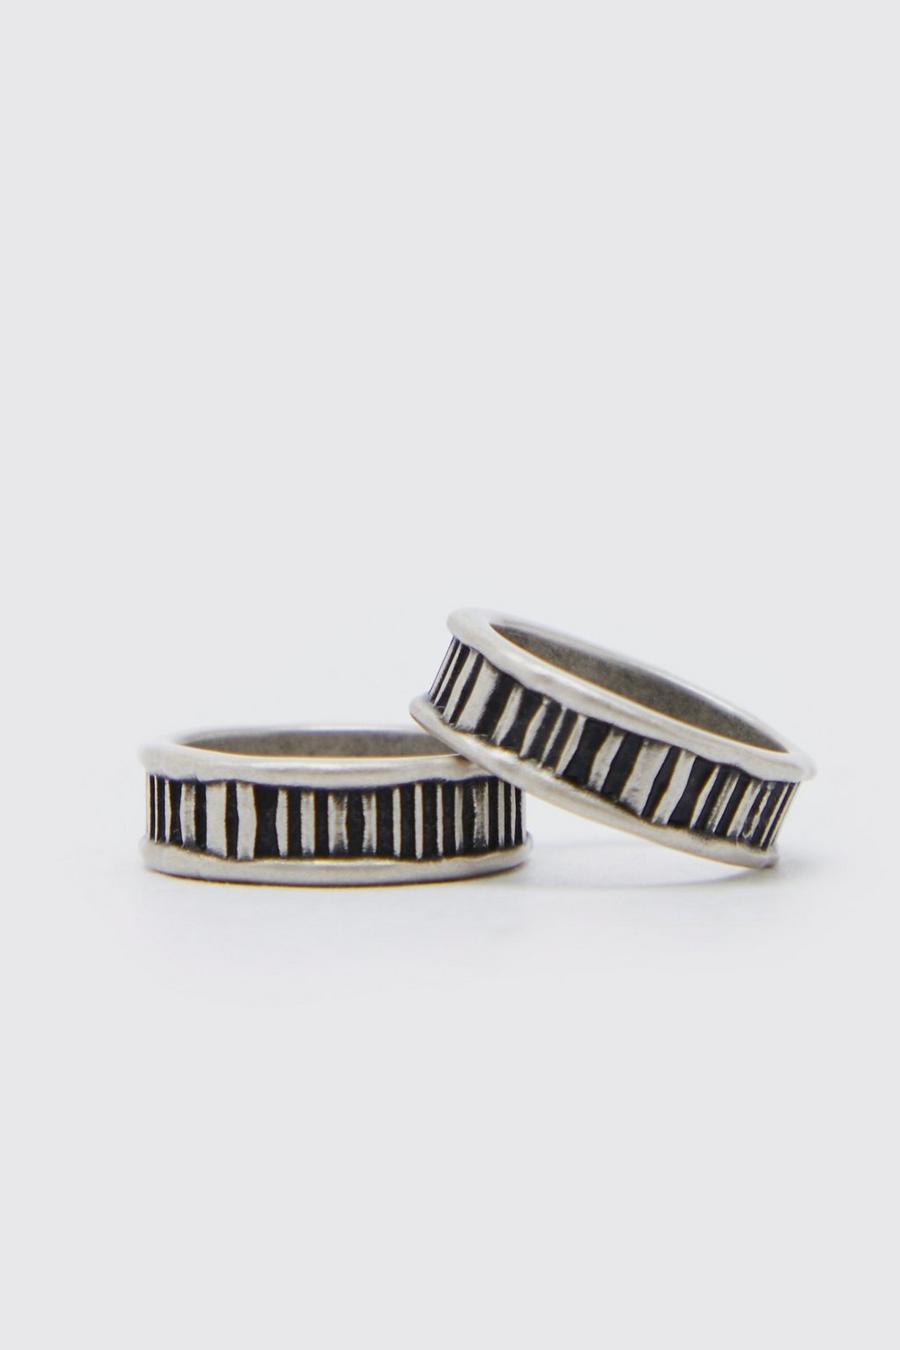 Silver Lined Textured 2 Pack Rings